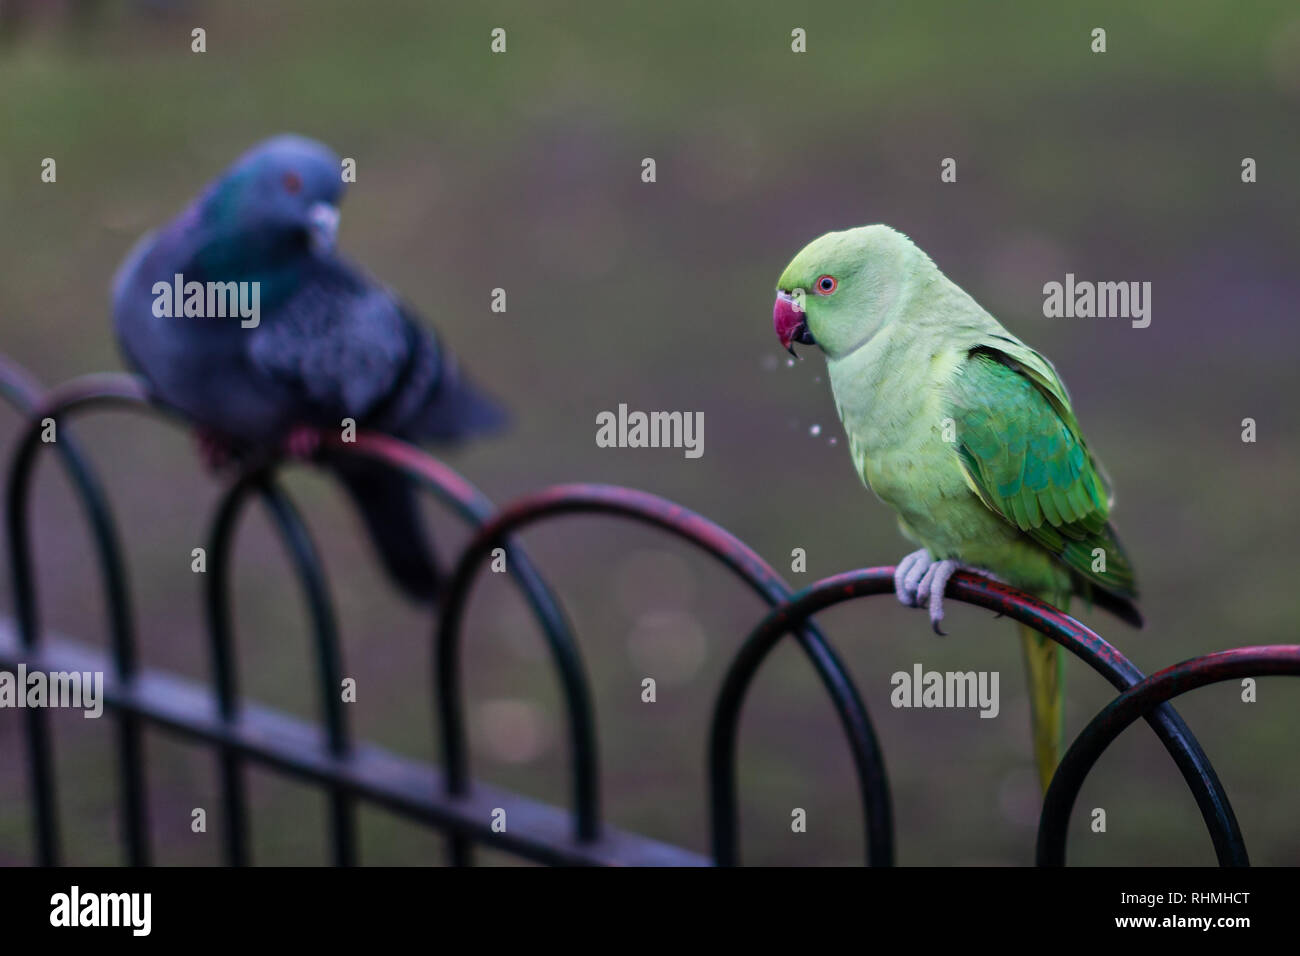 Two birds have a chinwag on railings in a London park. Stock Photo